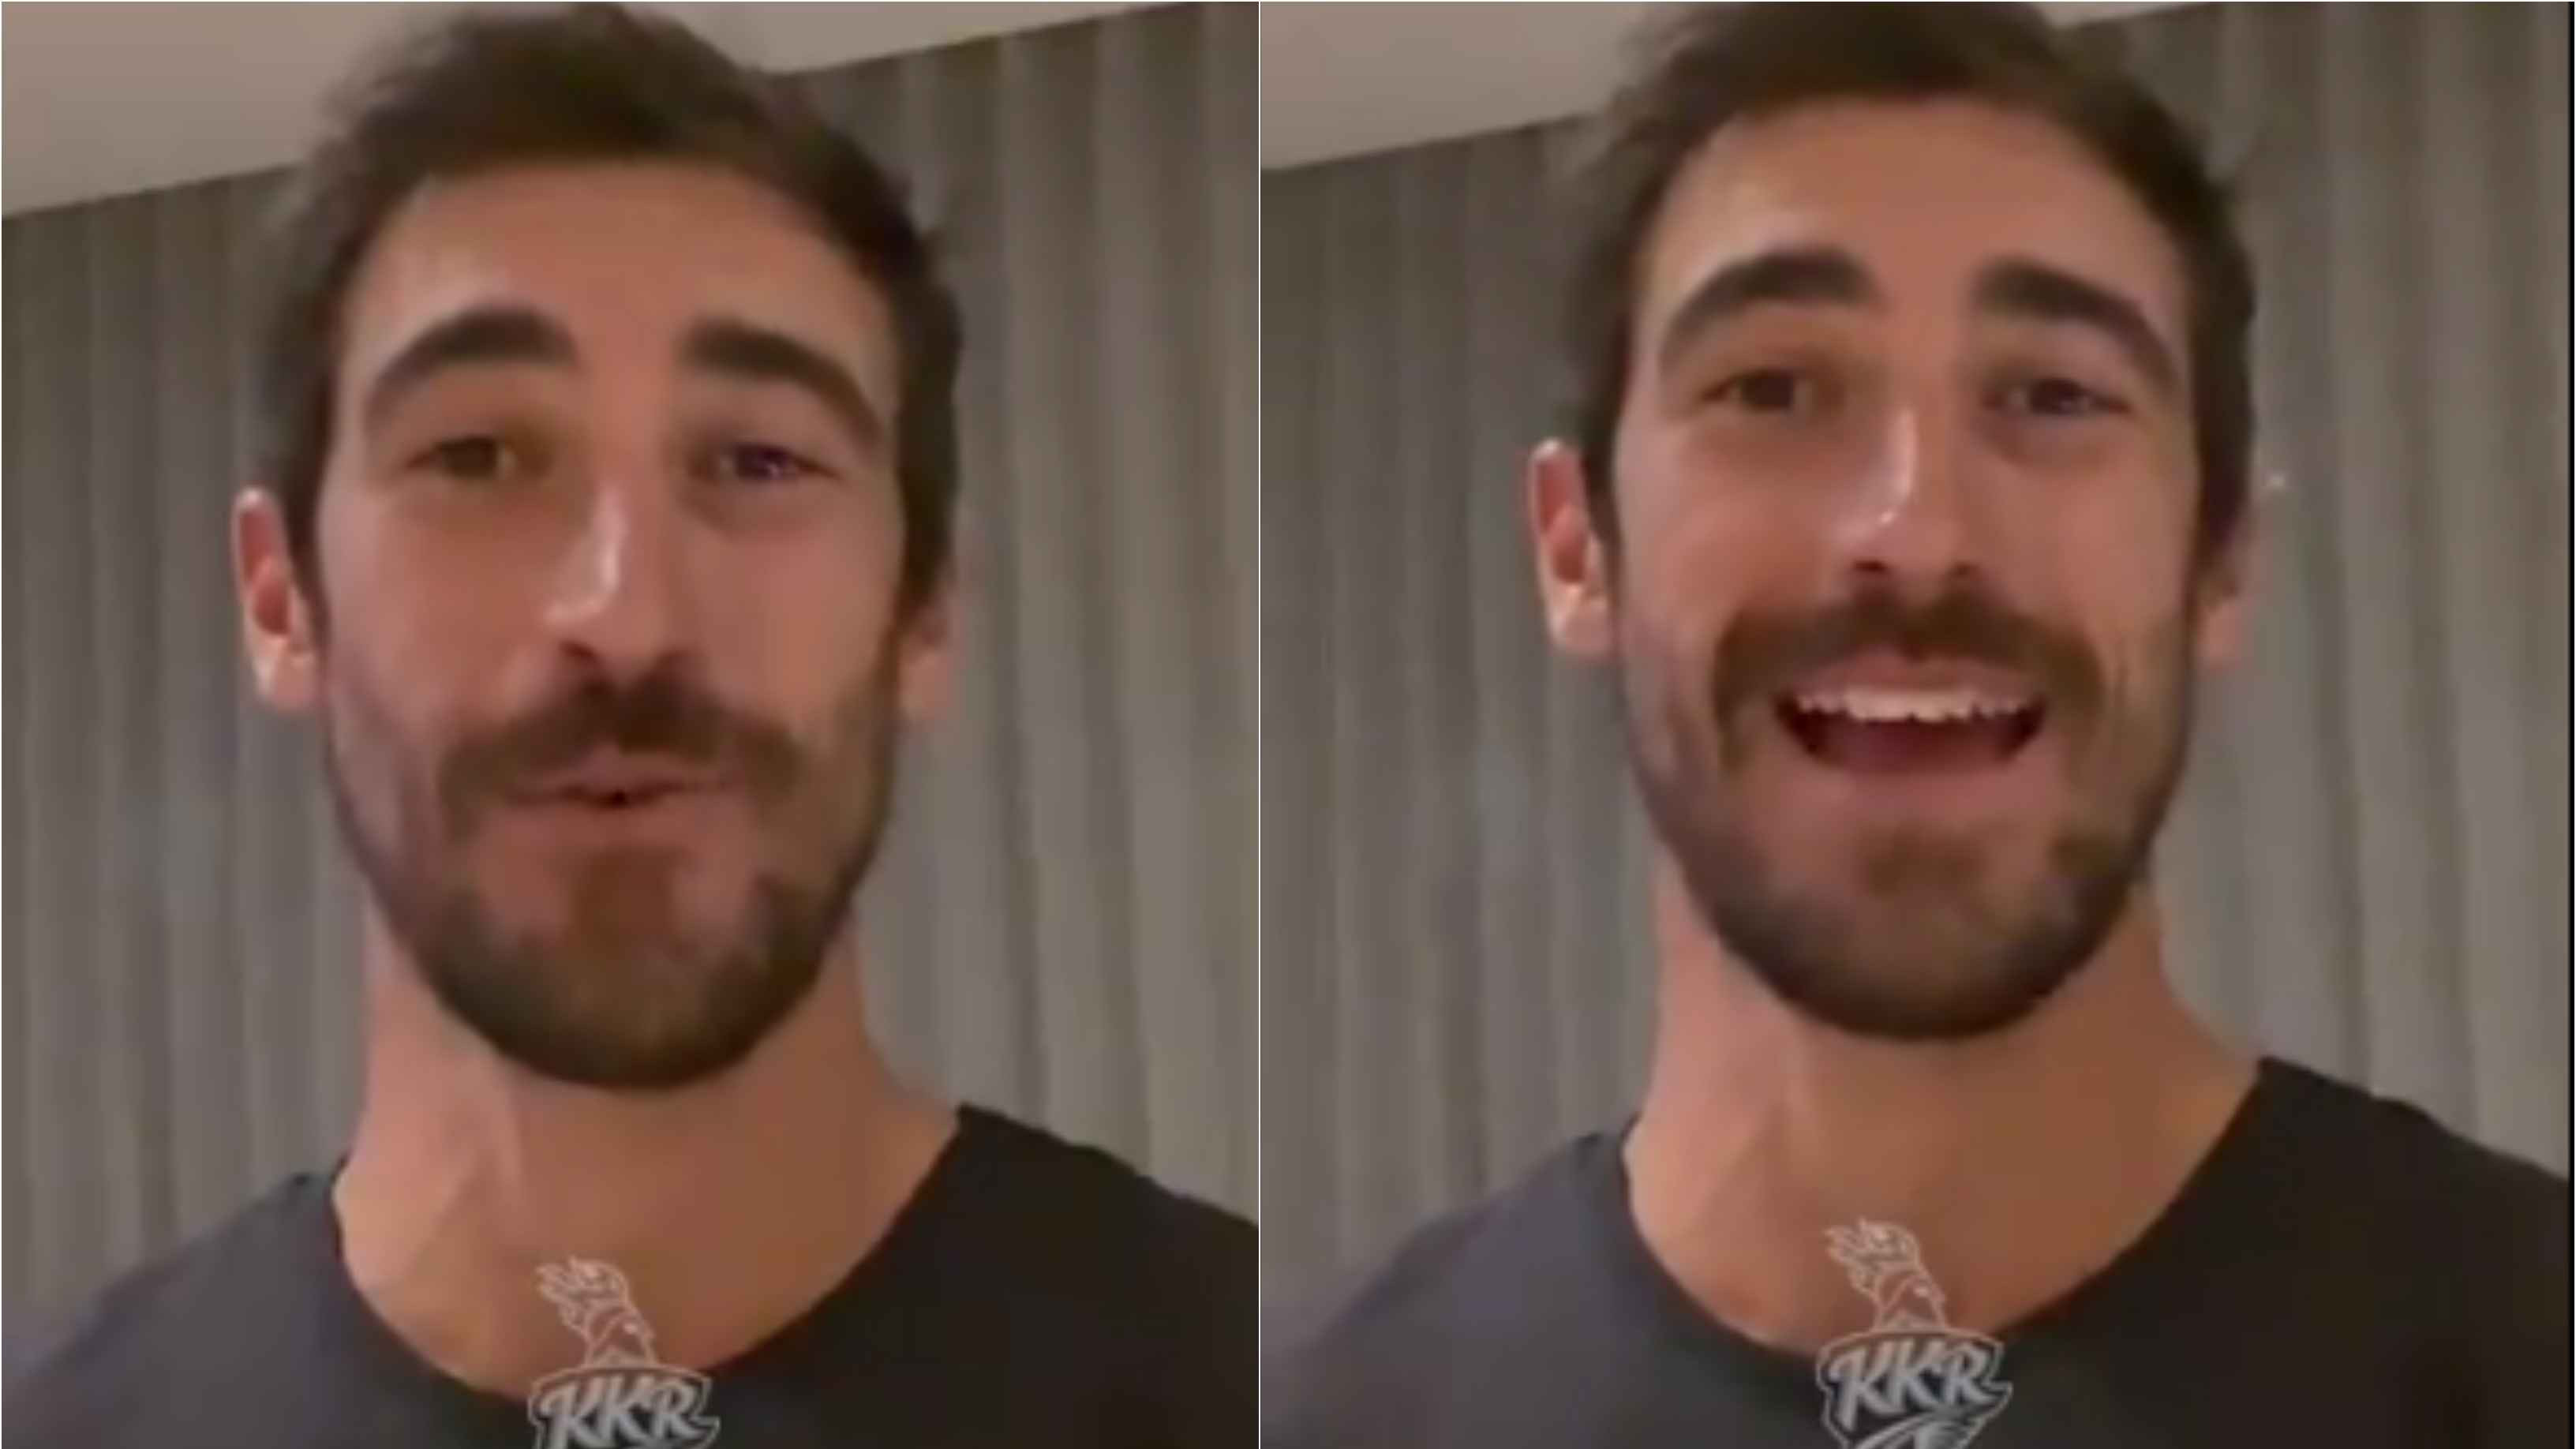 WATCH: “Can’t wait to get to Eden Gardens,” Mitchell Starc reacts after being signed by KKR for a record sum of Rs 24.75 crore